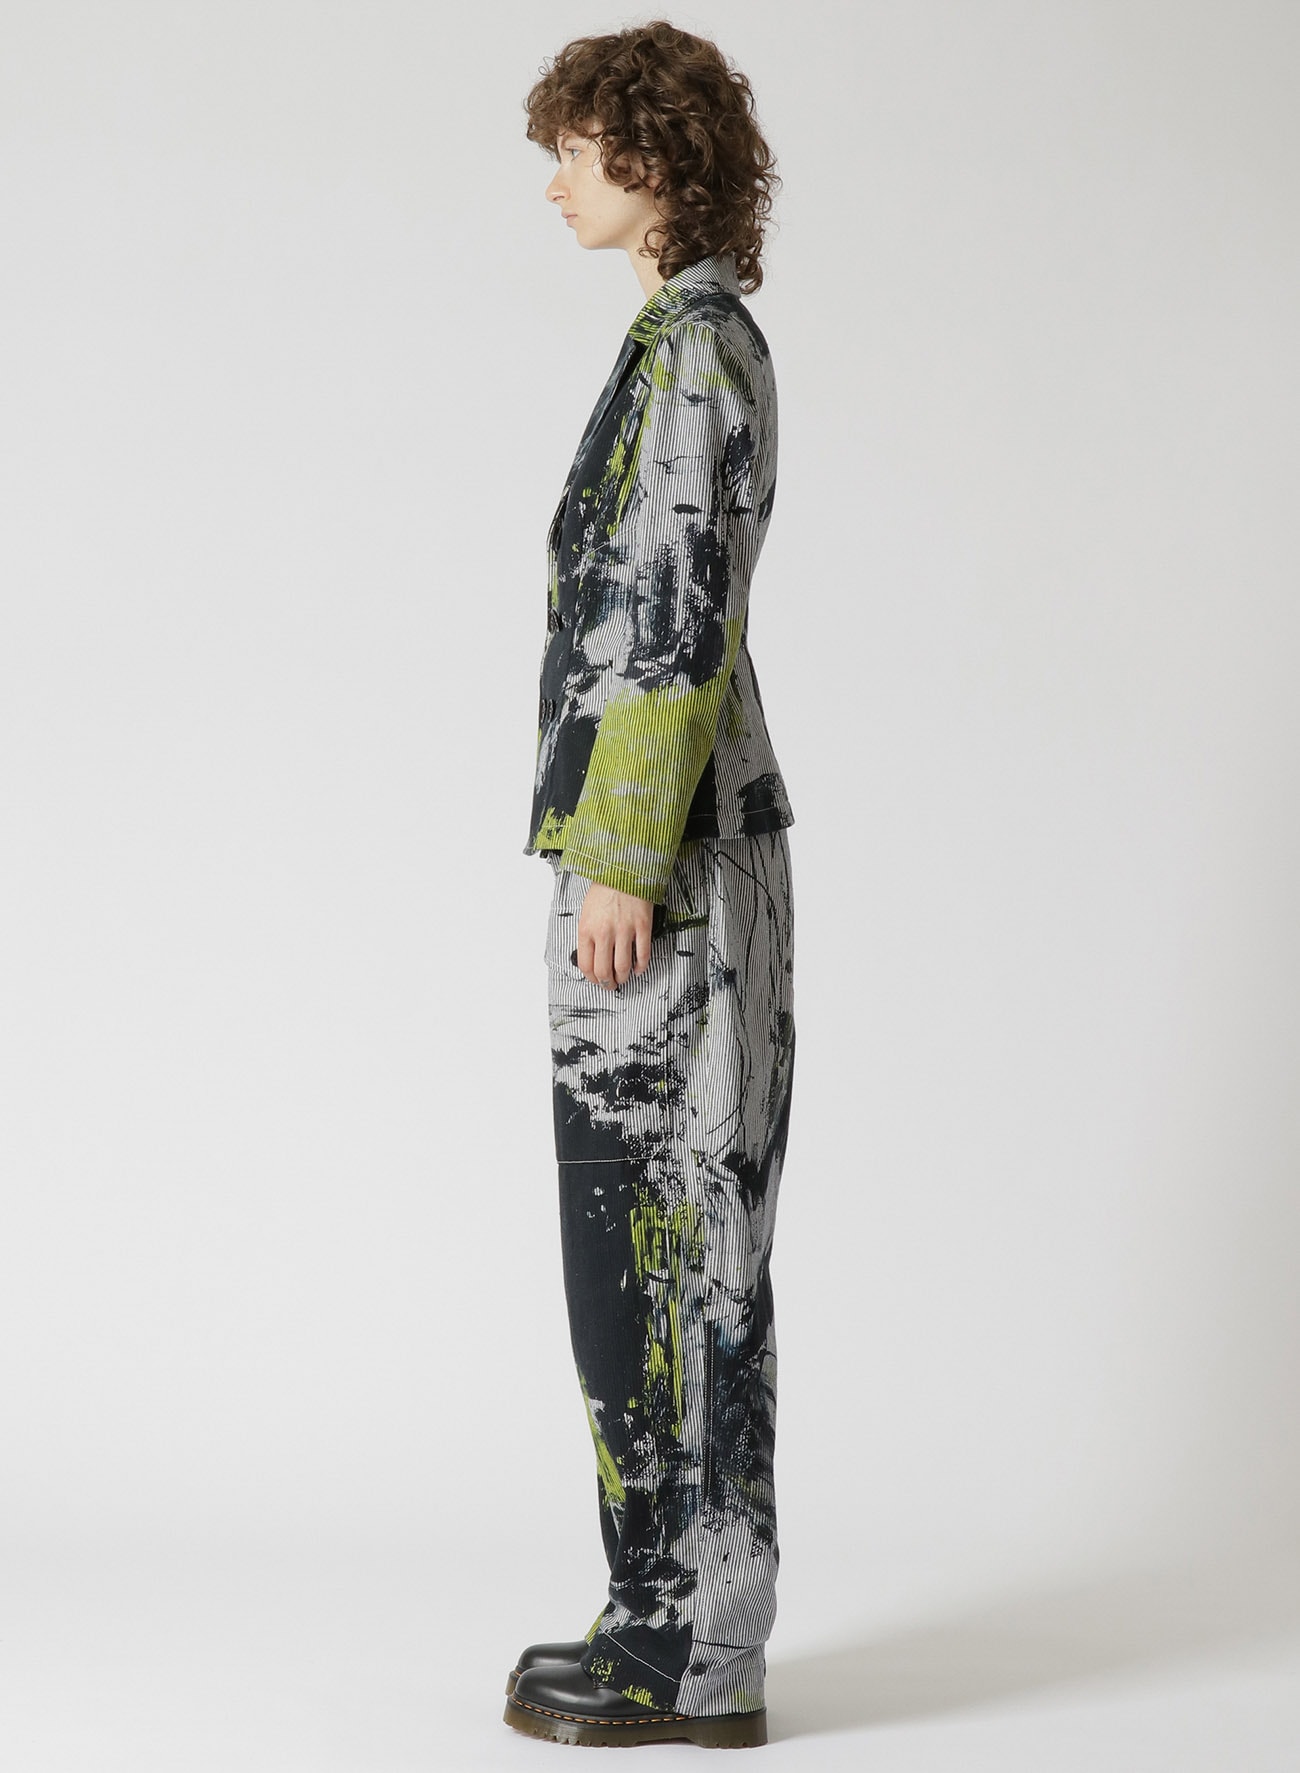 COTTON HICKORY ABSTRACT PAINT DOUBLE FRONT SLIM JACKET